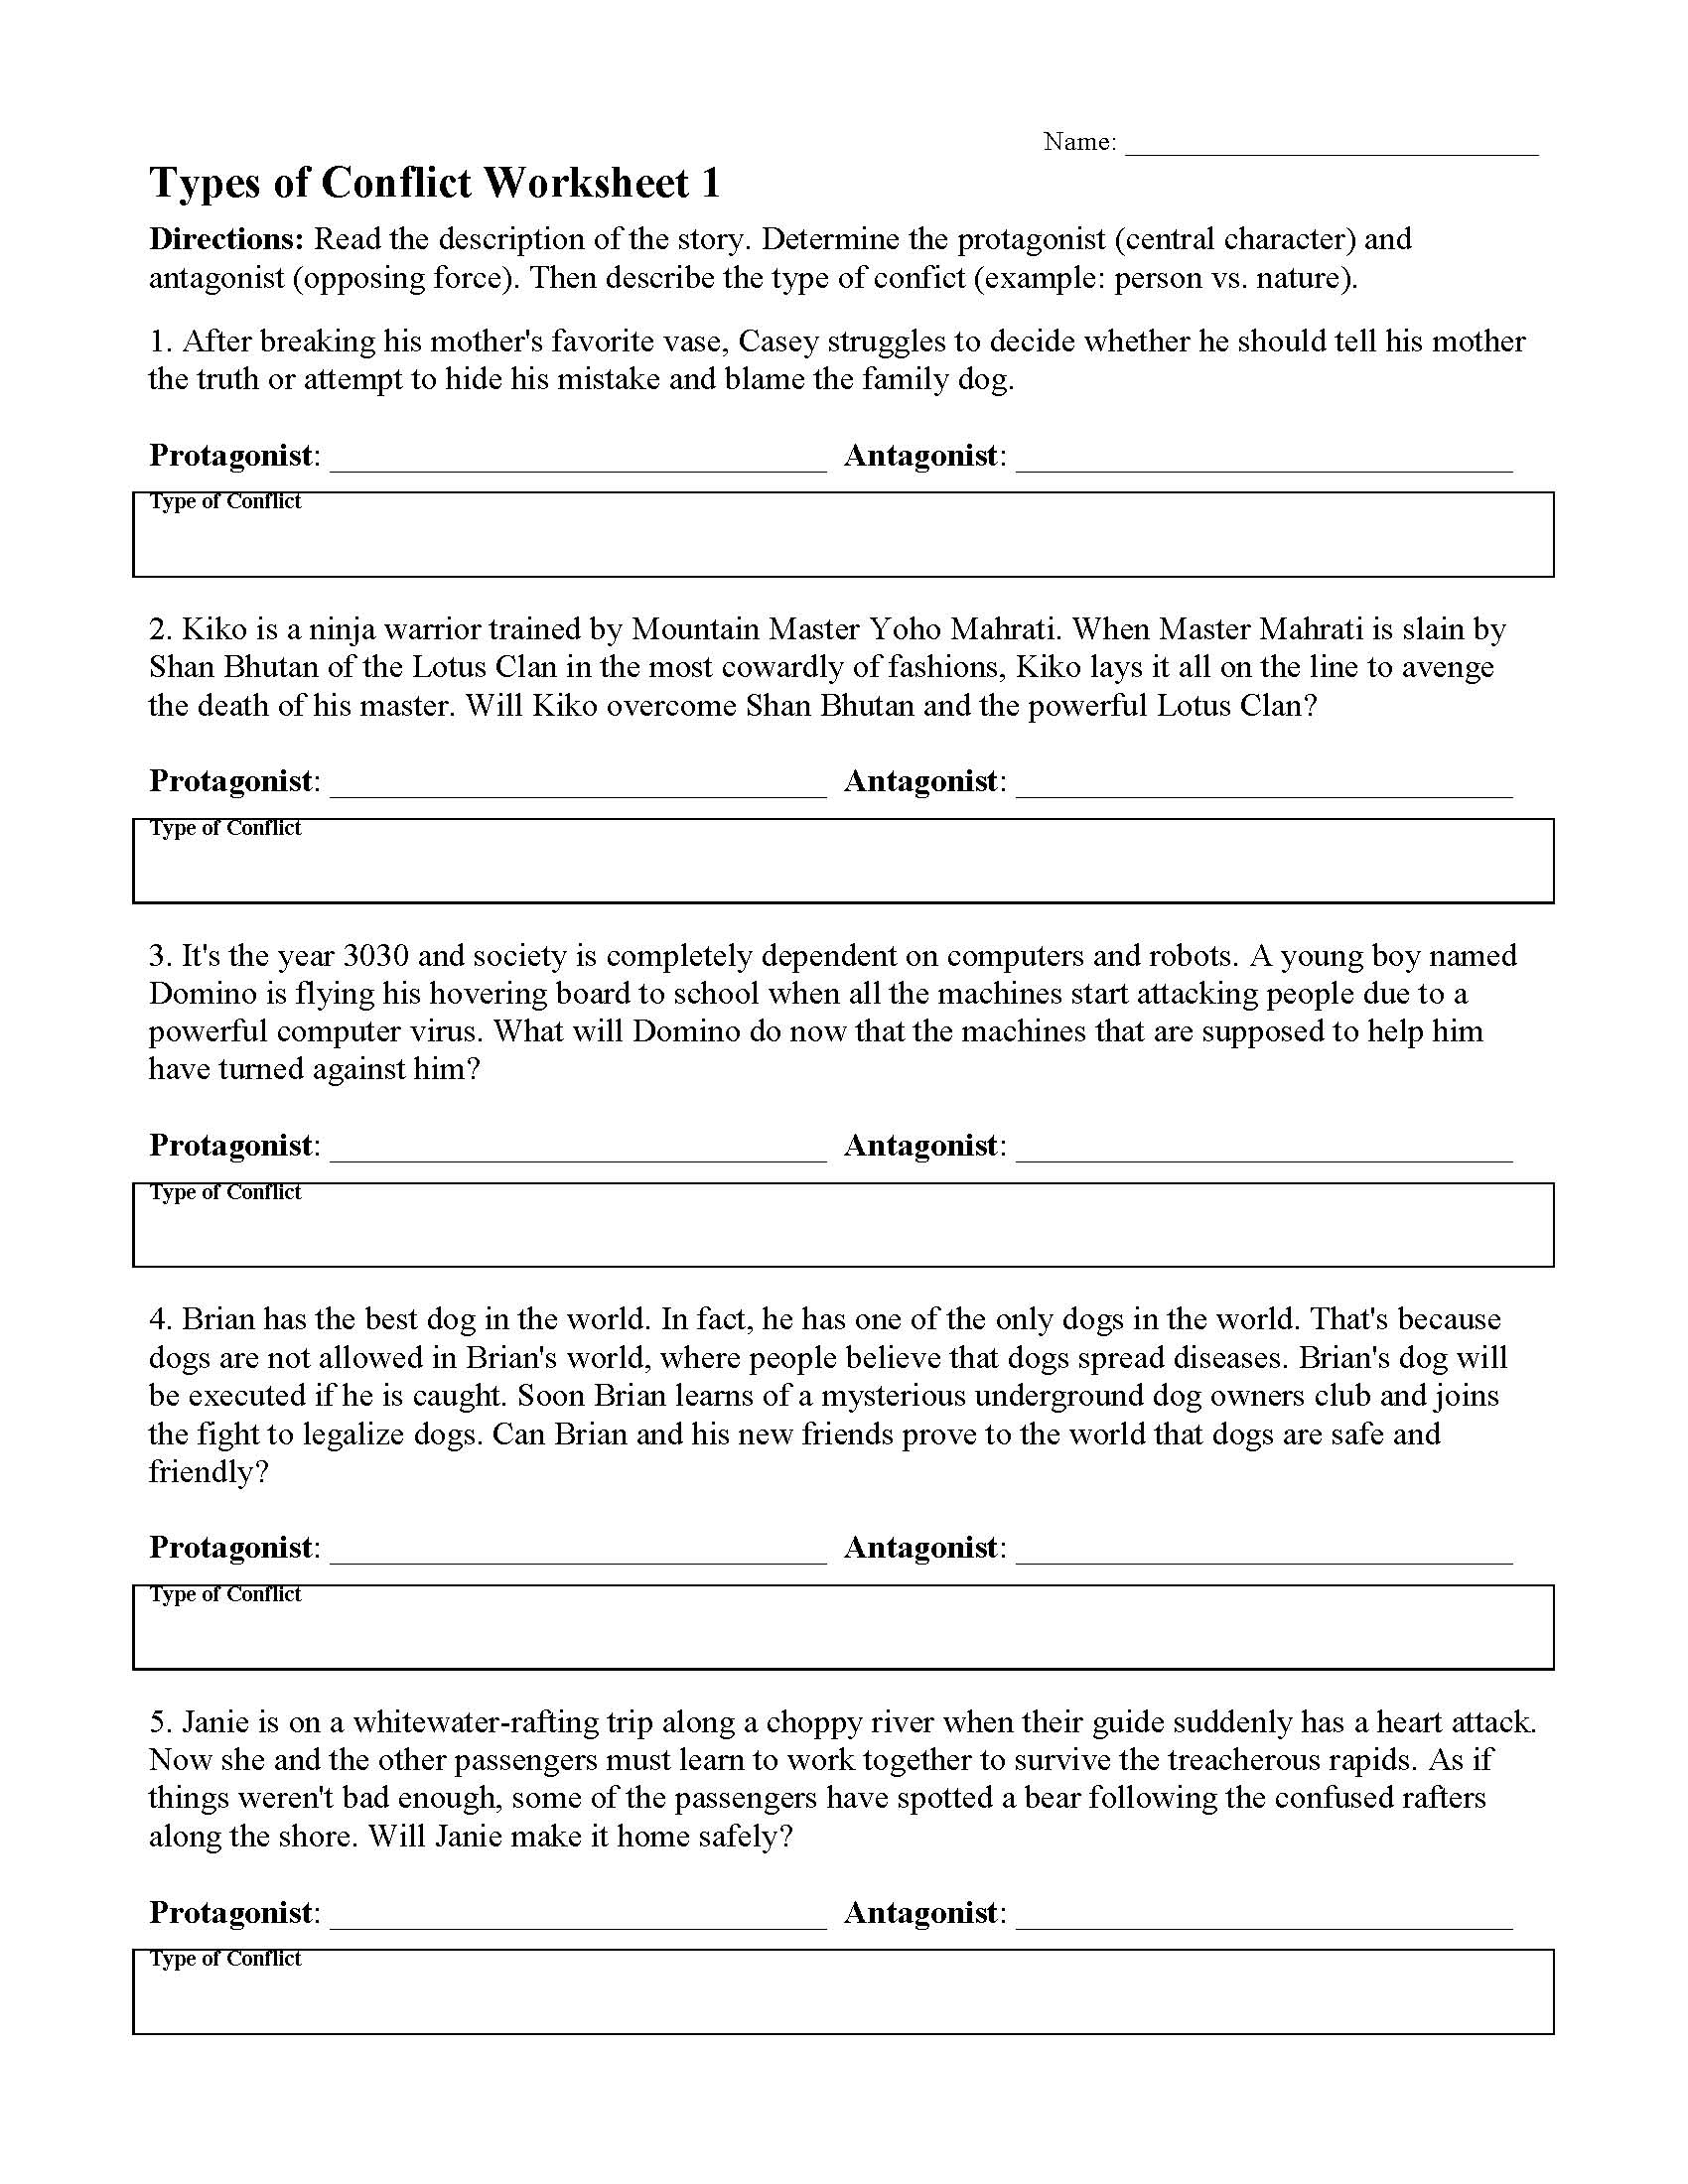 Types of Conflicts in Stories - Worksheets & Lessons  Ereading For Types Of Conflict Worksheet